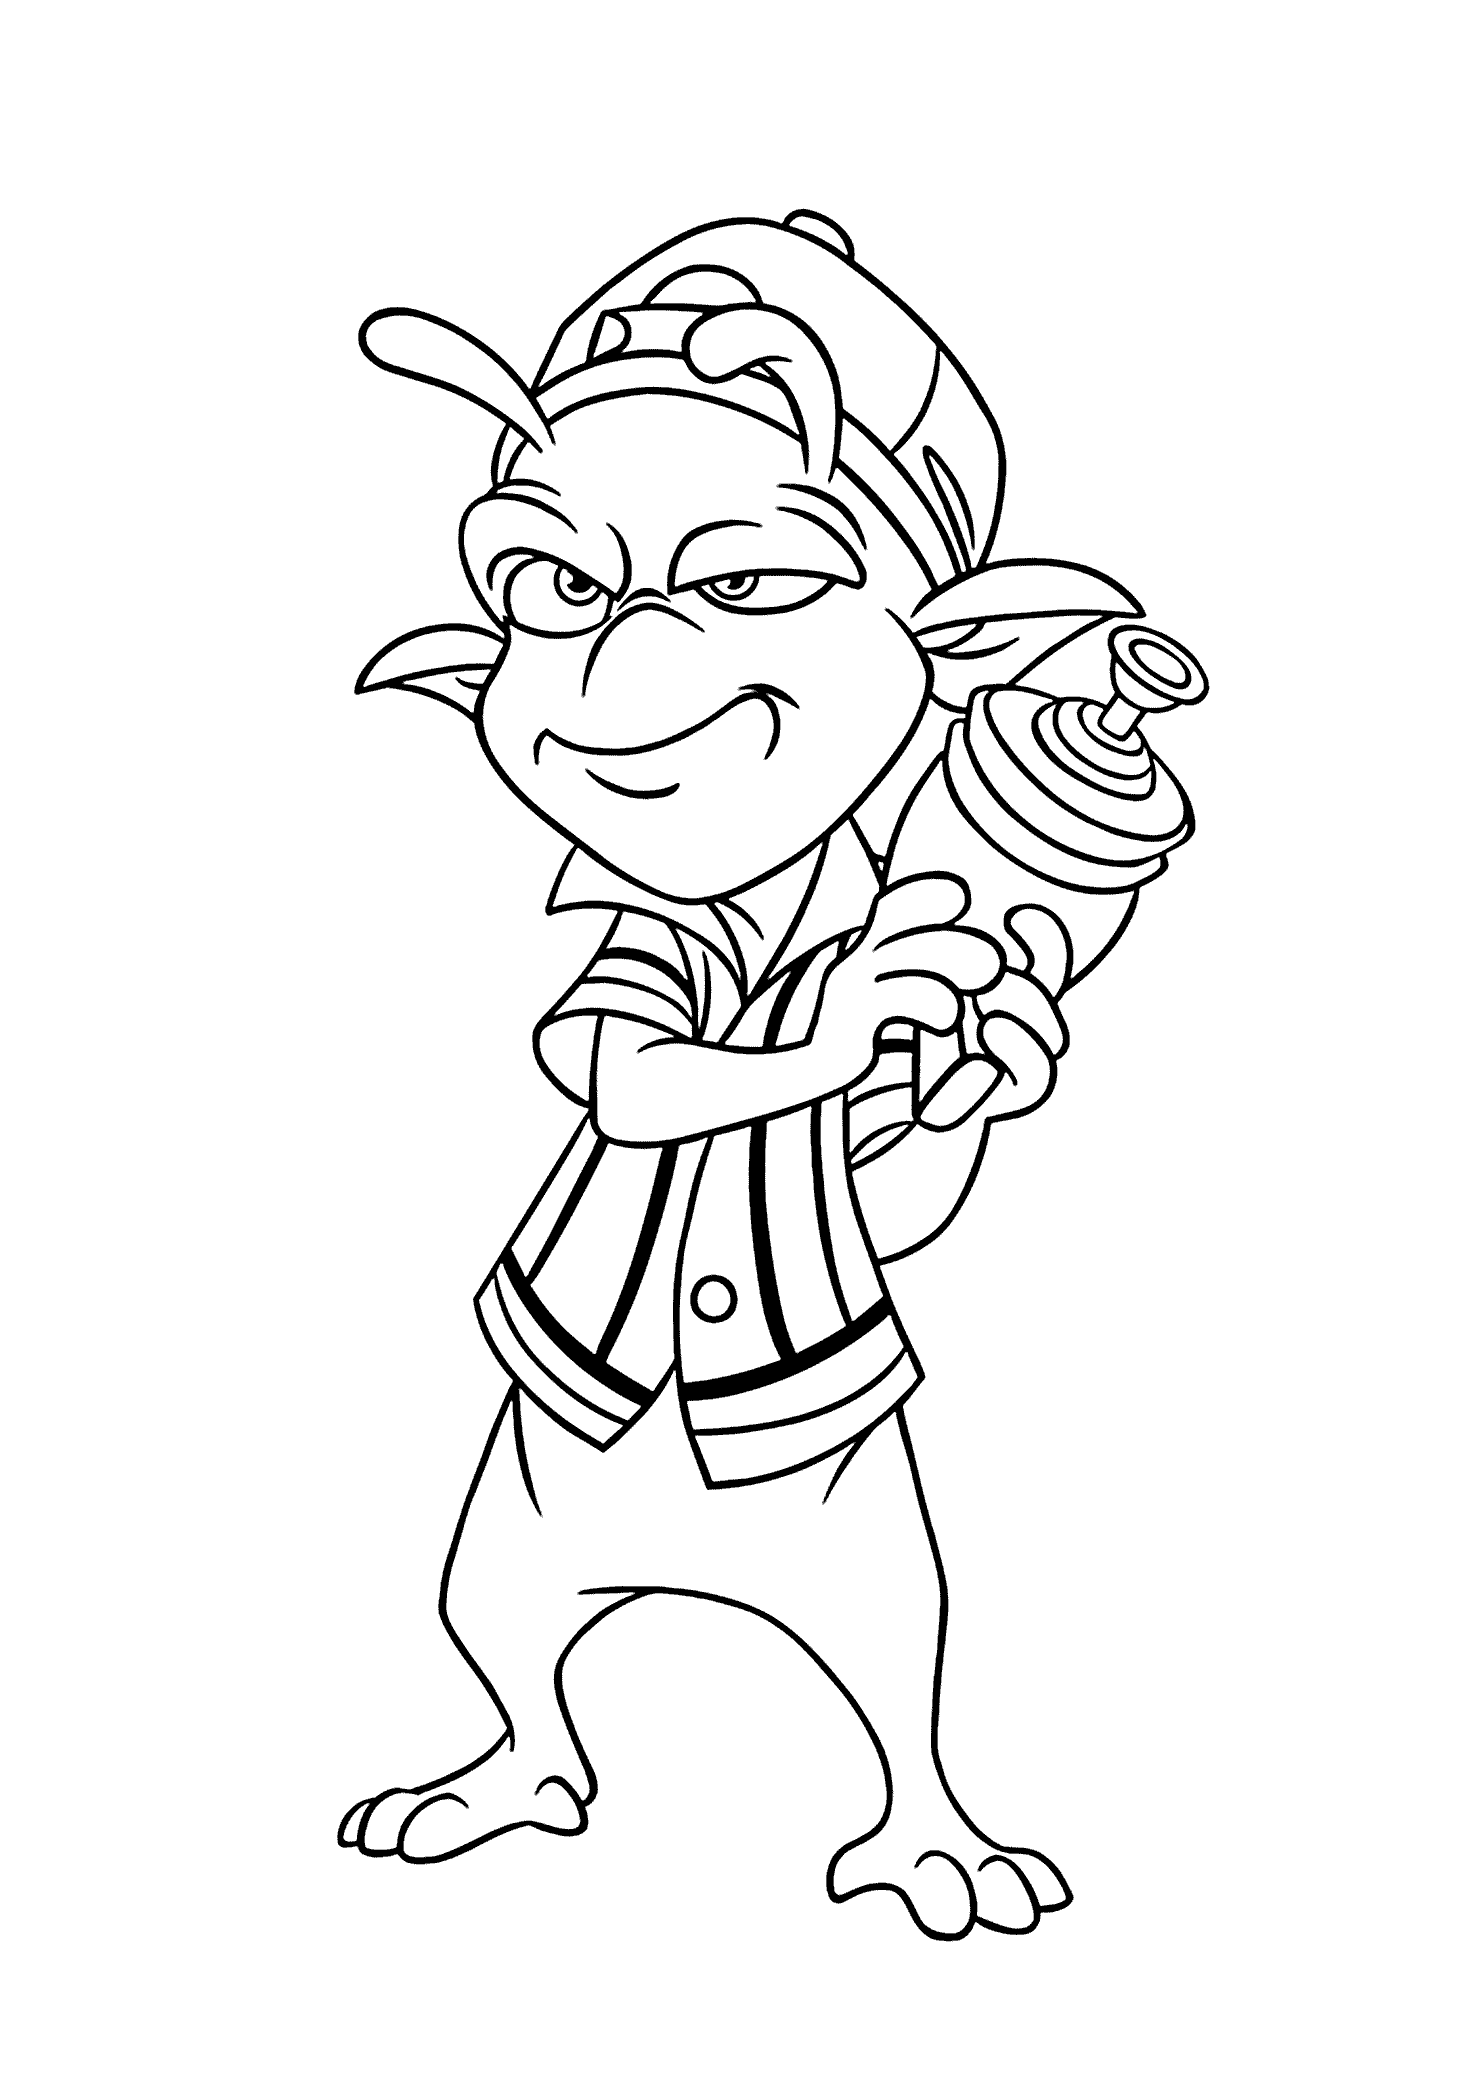 Planet 51 Coloring Page